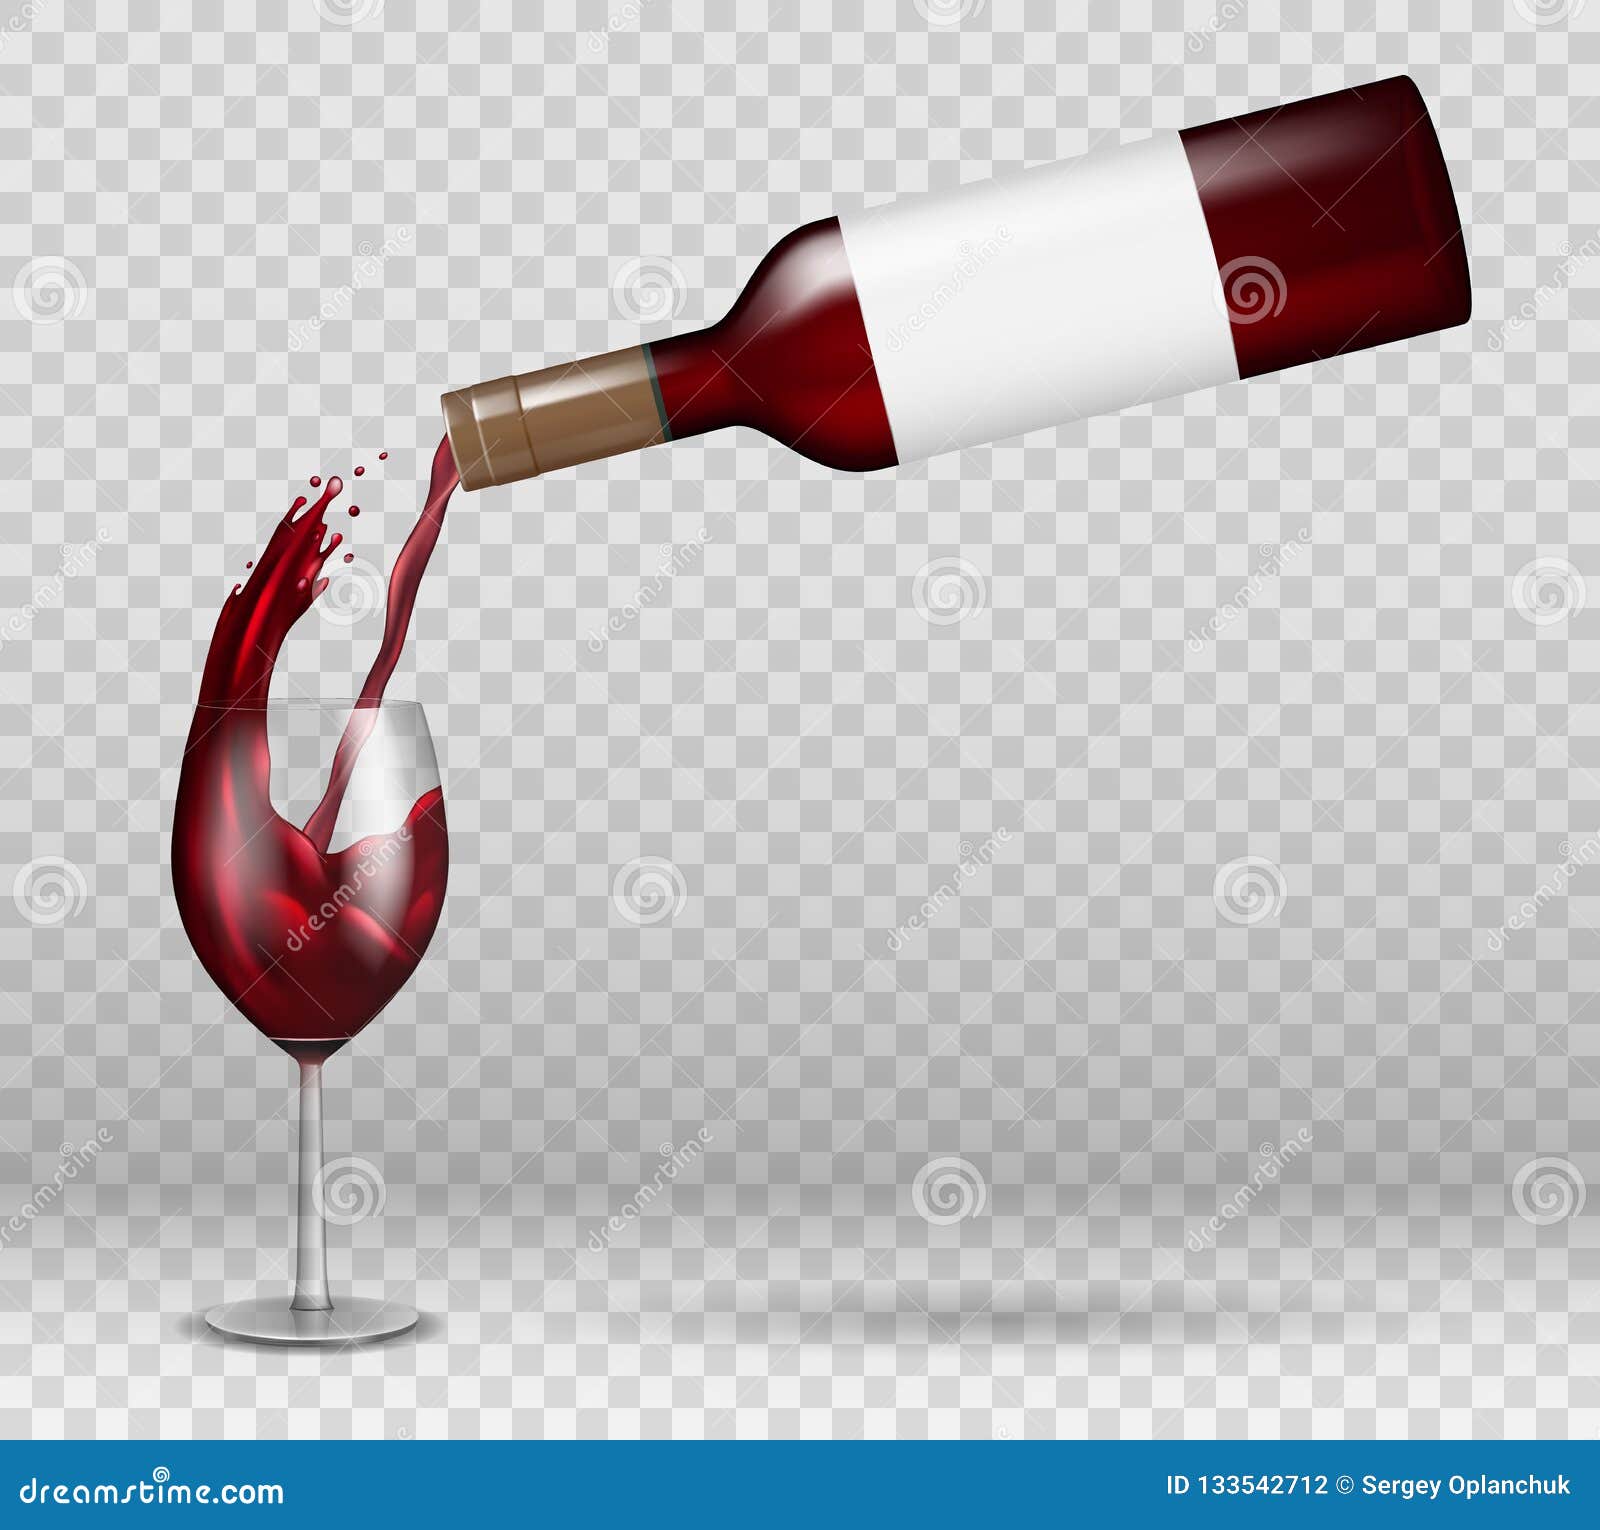 transparent wine bottle and wineglass mockup with reflection. red wine liquid pouring down with splash in glass 